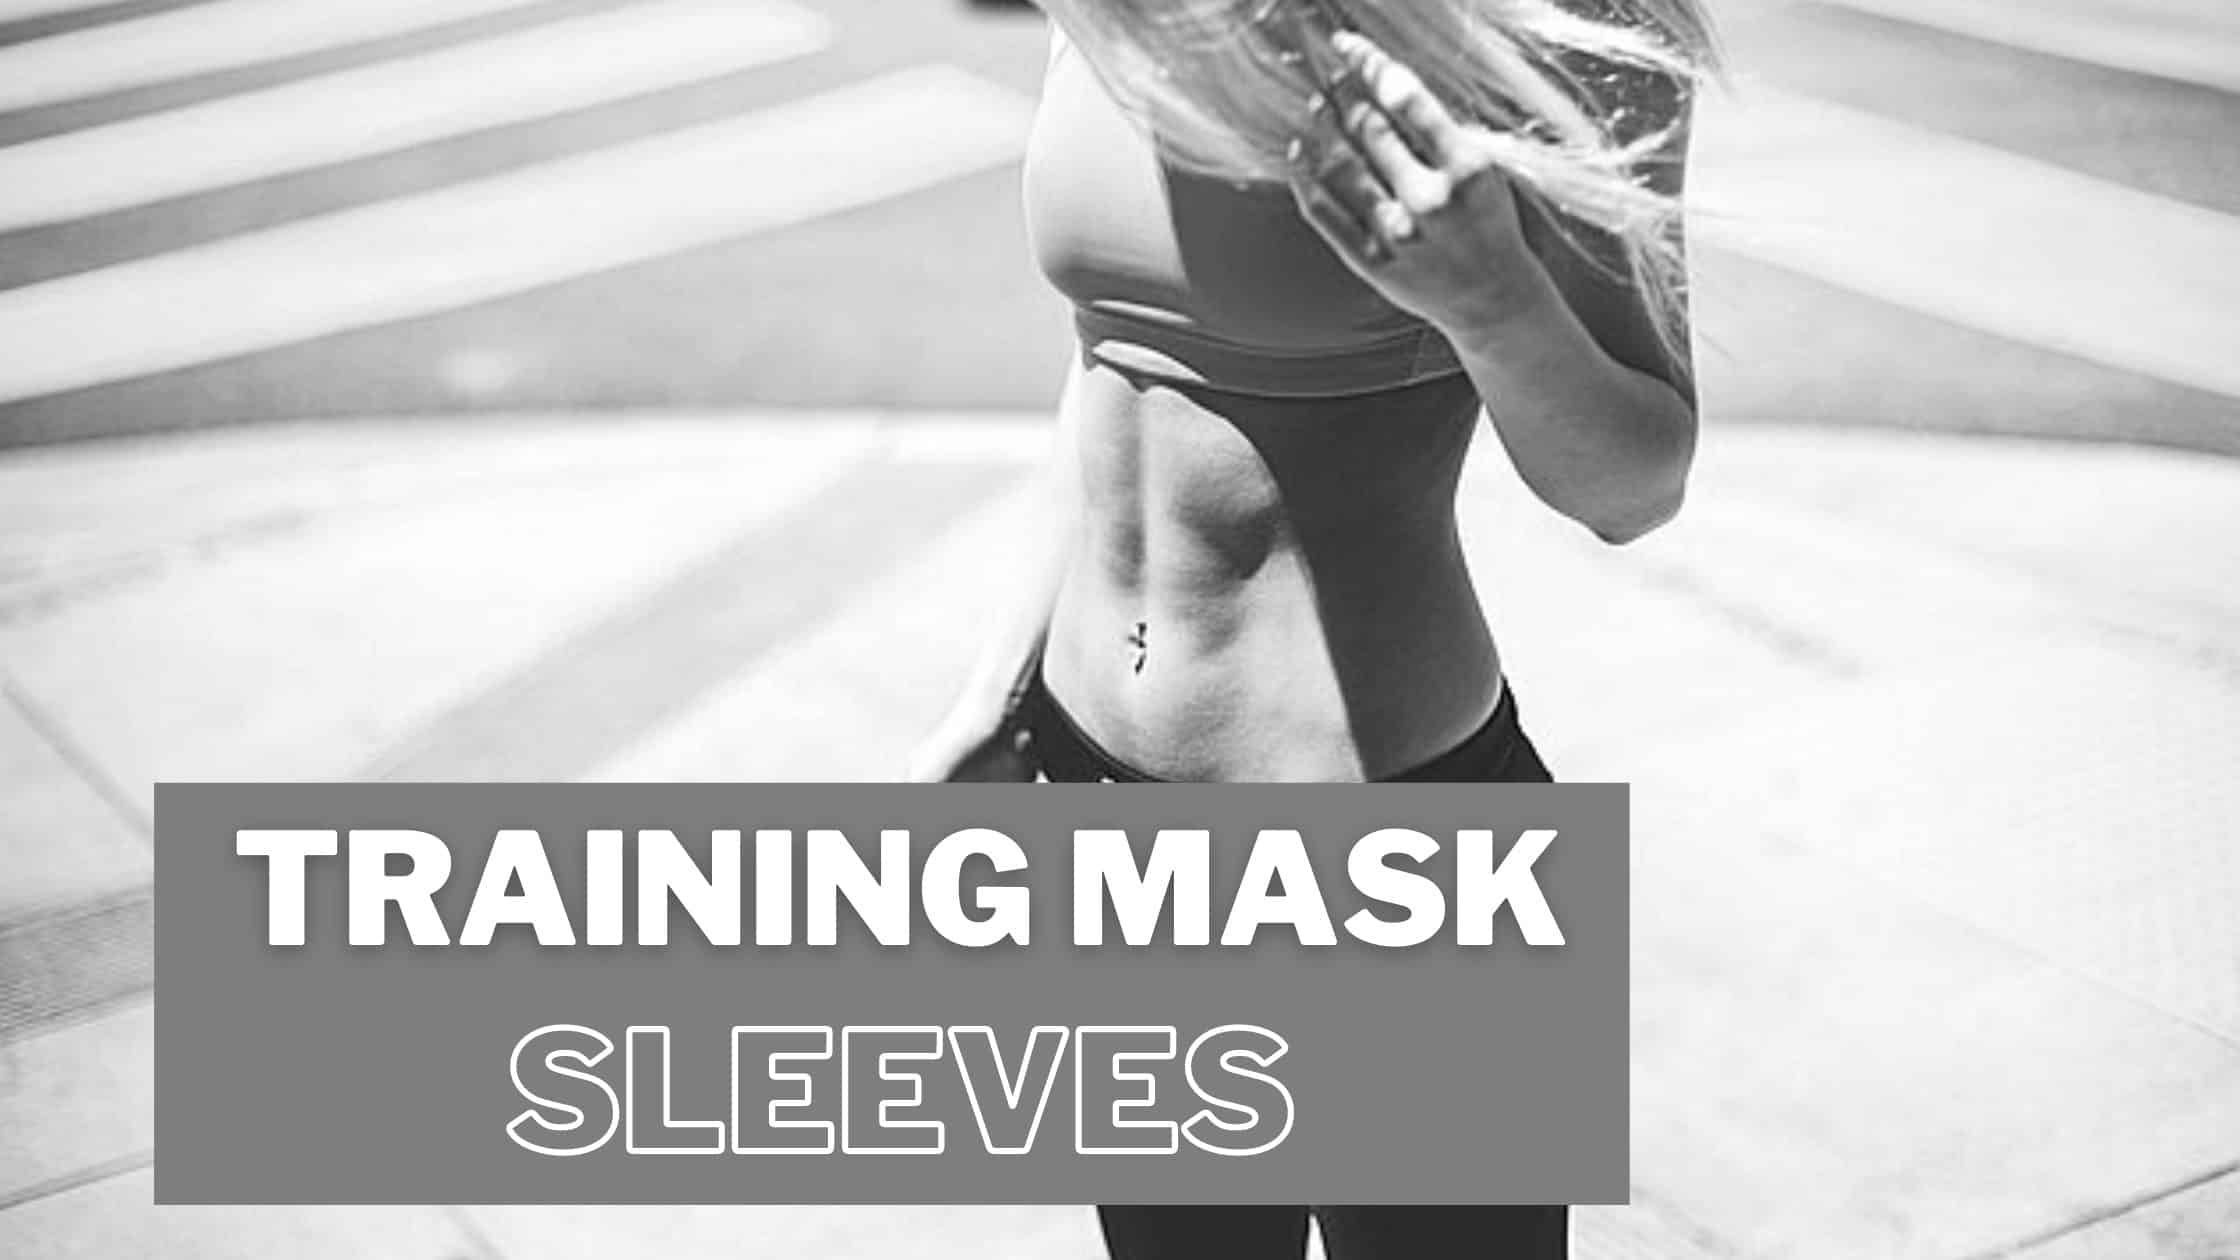 Training mask Sleeves - Things to Consider Before Buying